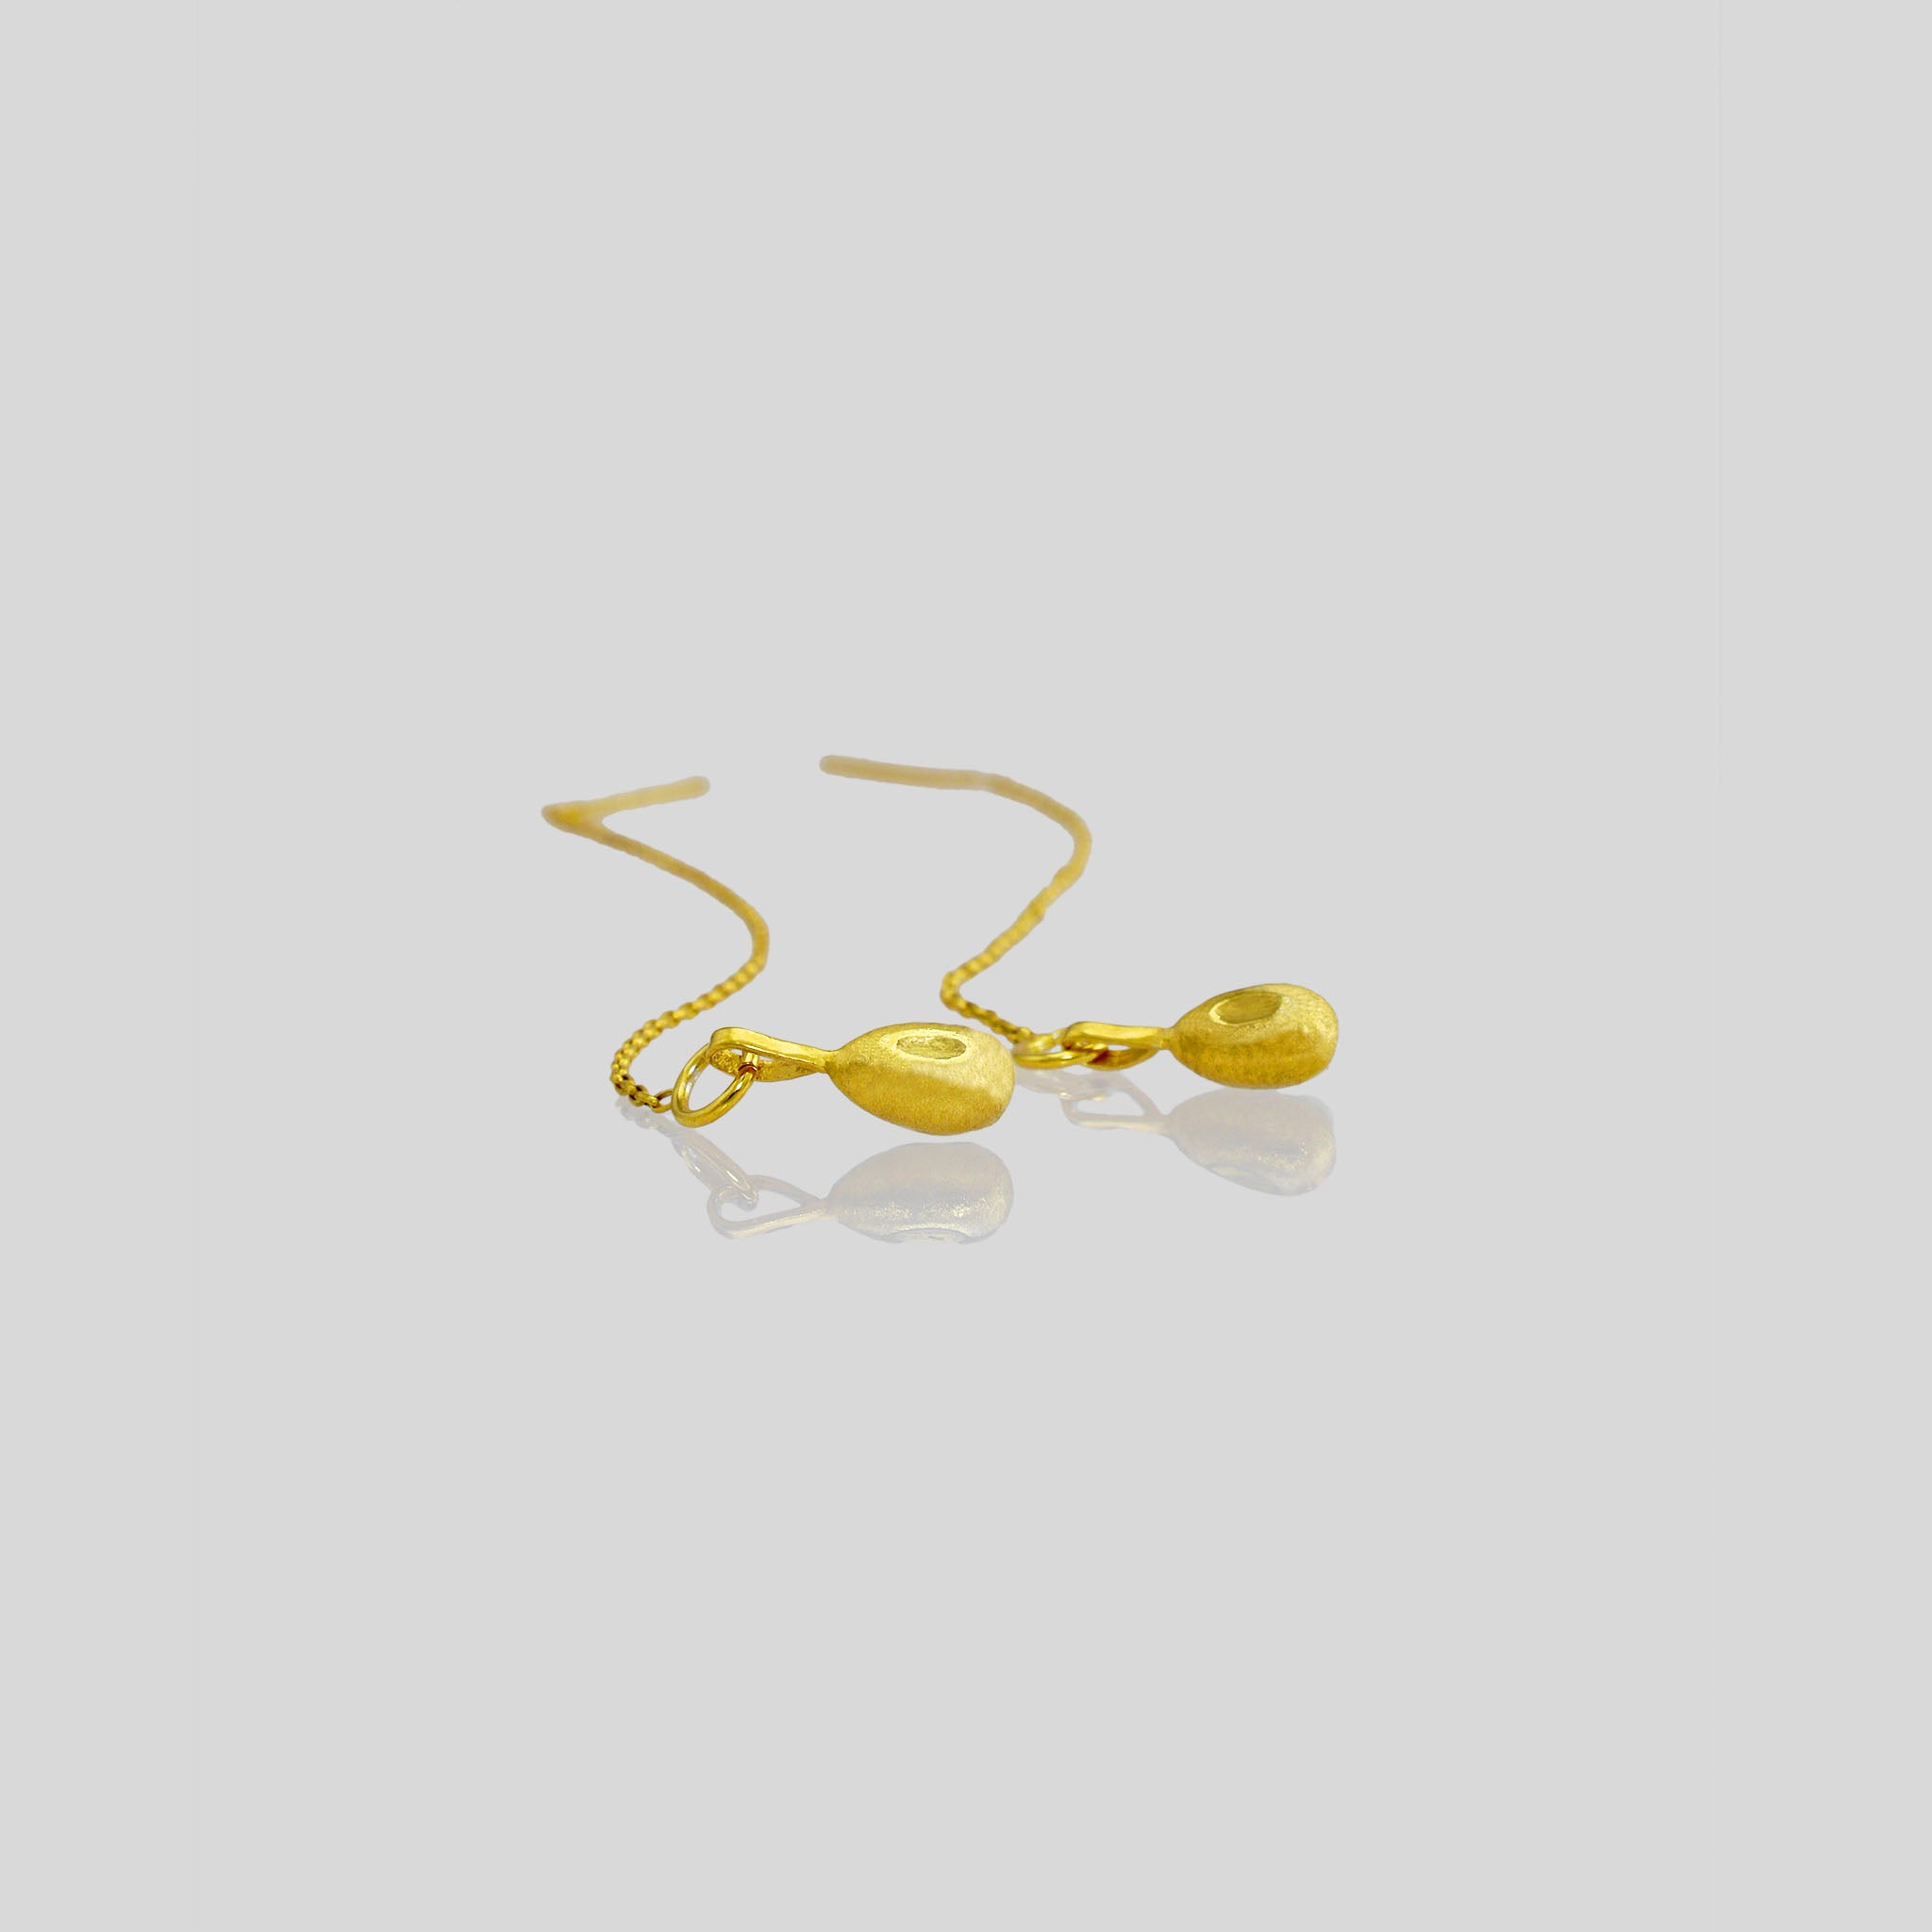 Nature-inspired gold earrings with a delicate chain and needle-tip attachment, embodying graceful and organic movement.